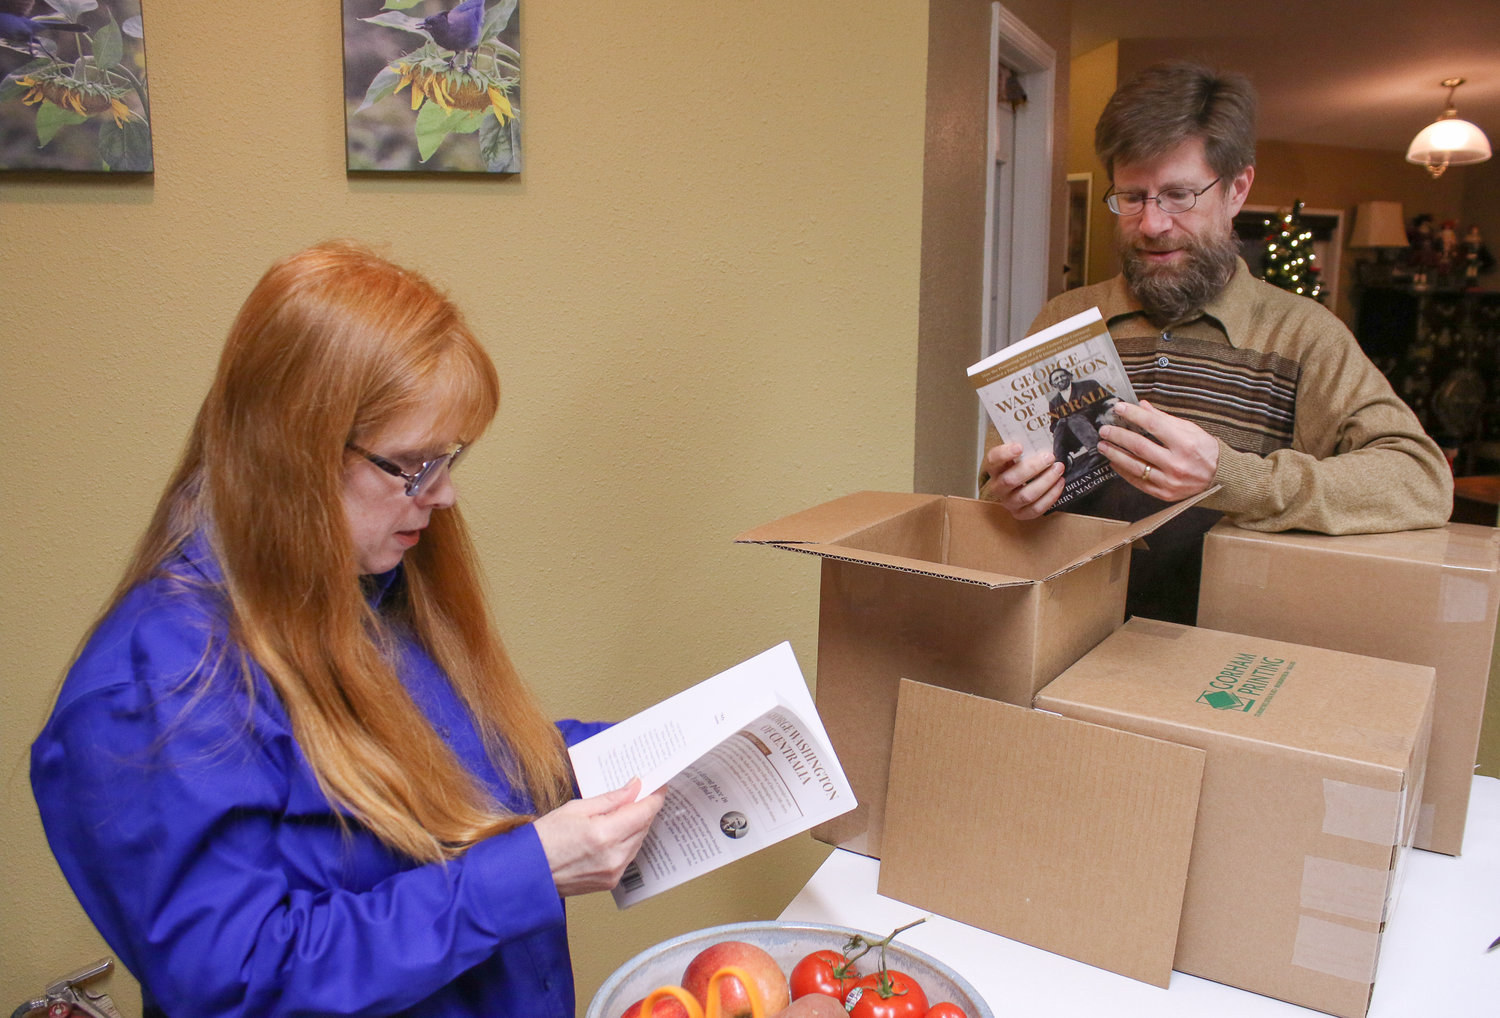 Local Authors Kerry Serl and Brian Mittge unbox the newly printed second editions of their biography titled George Washington of Centralia.